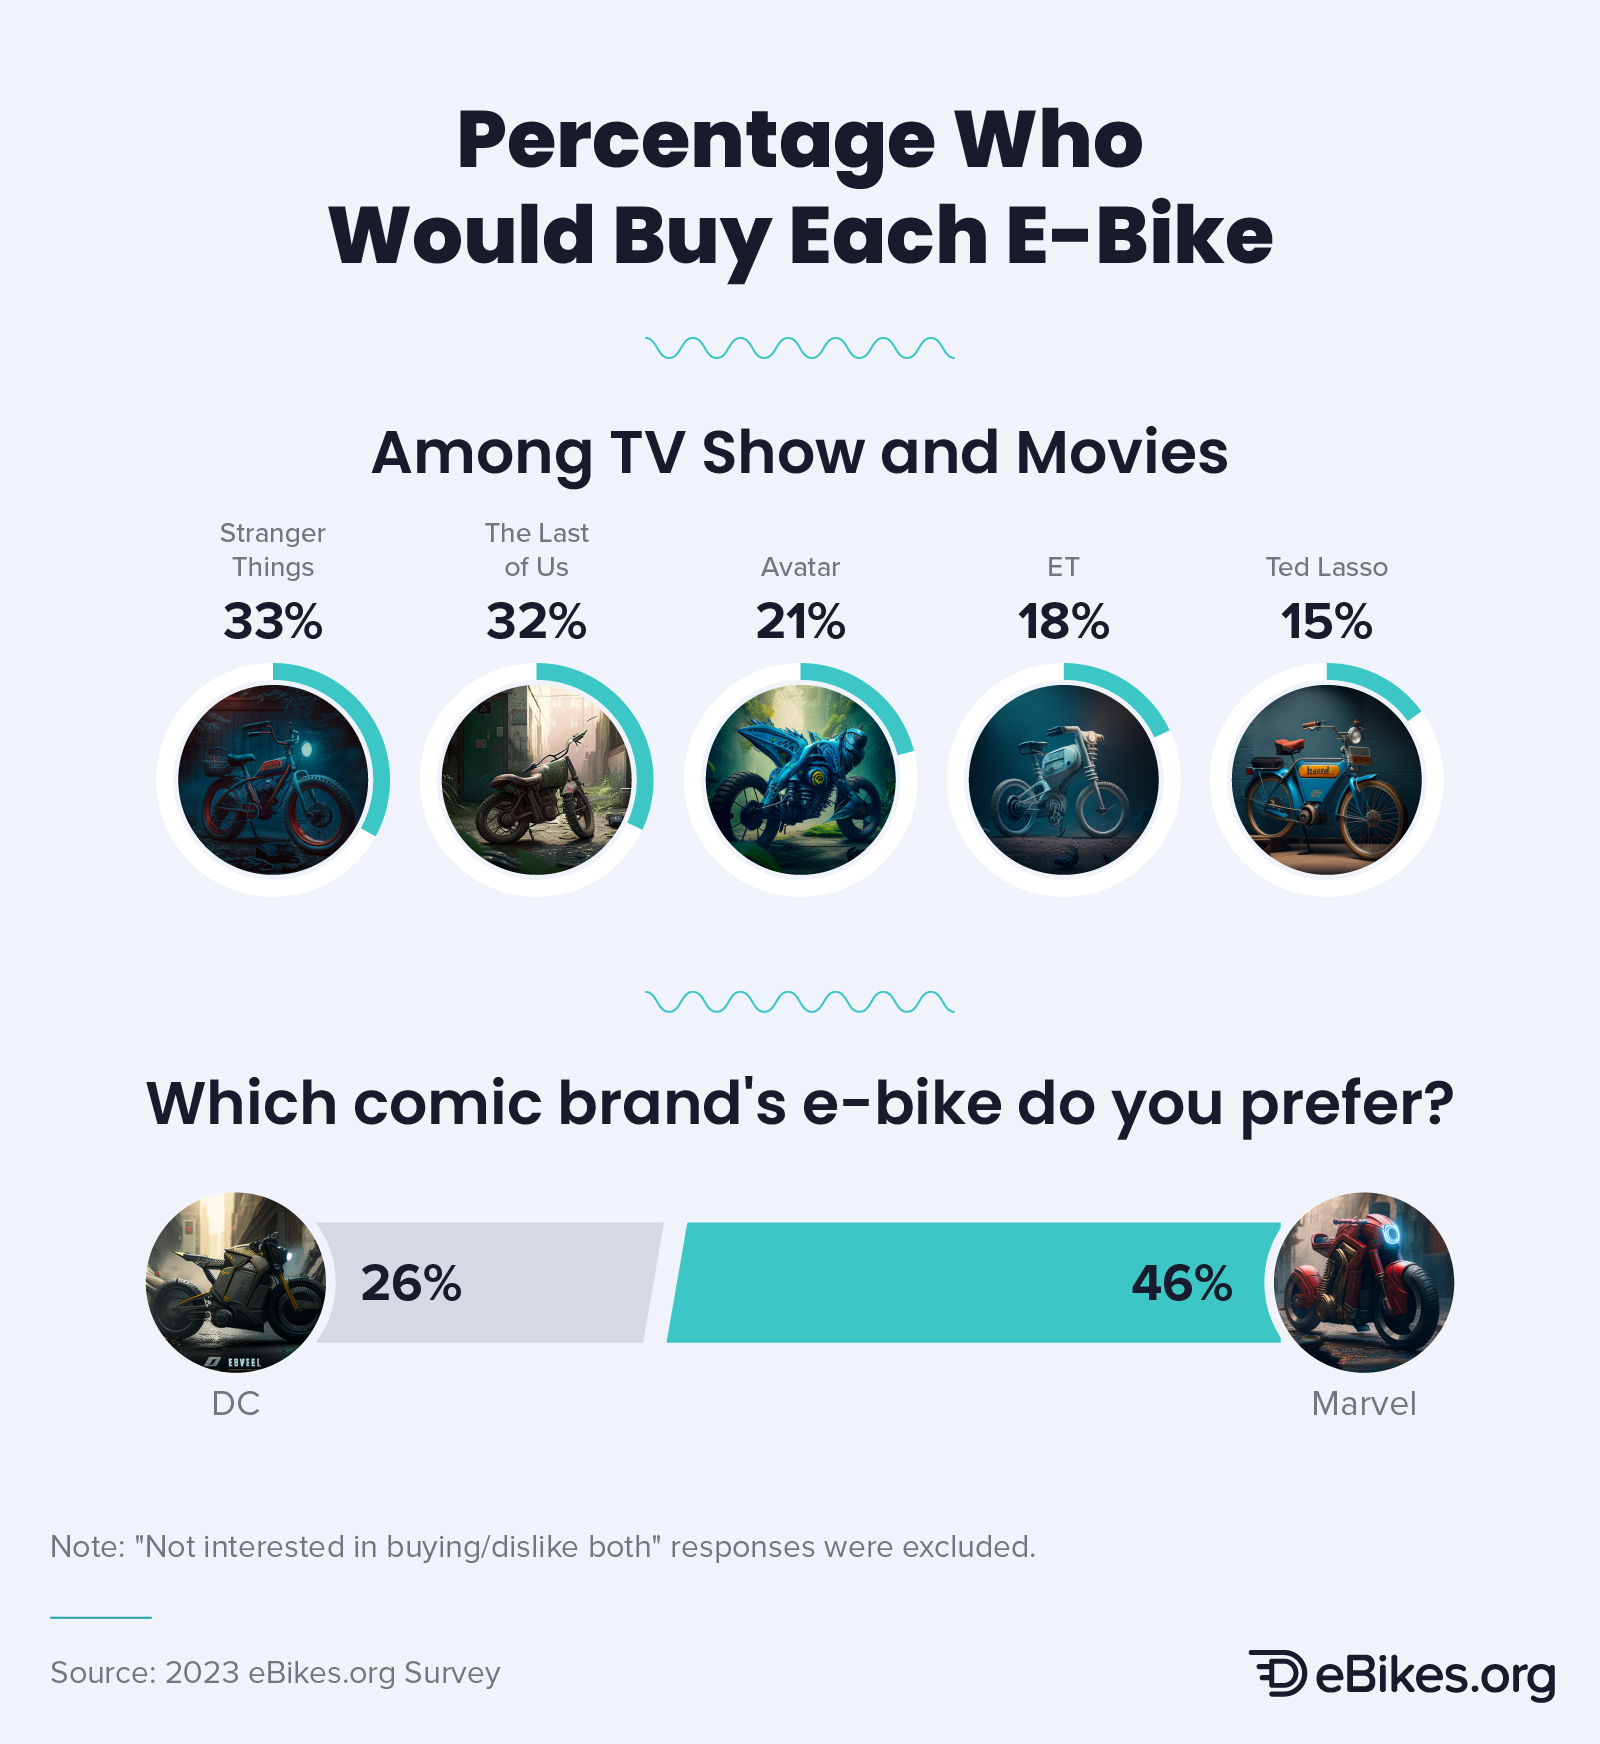 Infographic that explores the percentage of consumers who would buy each AI-generated branded e-bike, among TV shows and movies, and comic brands.